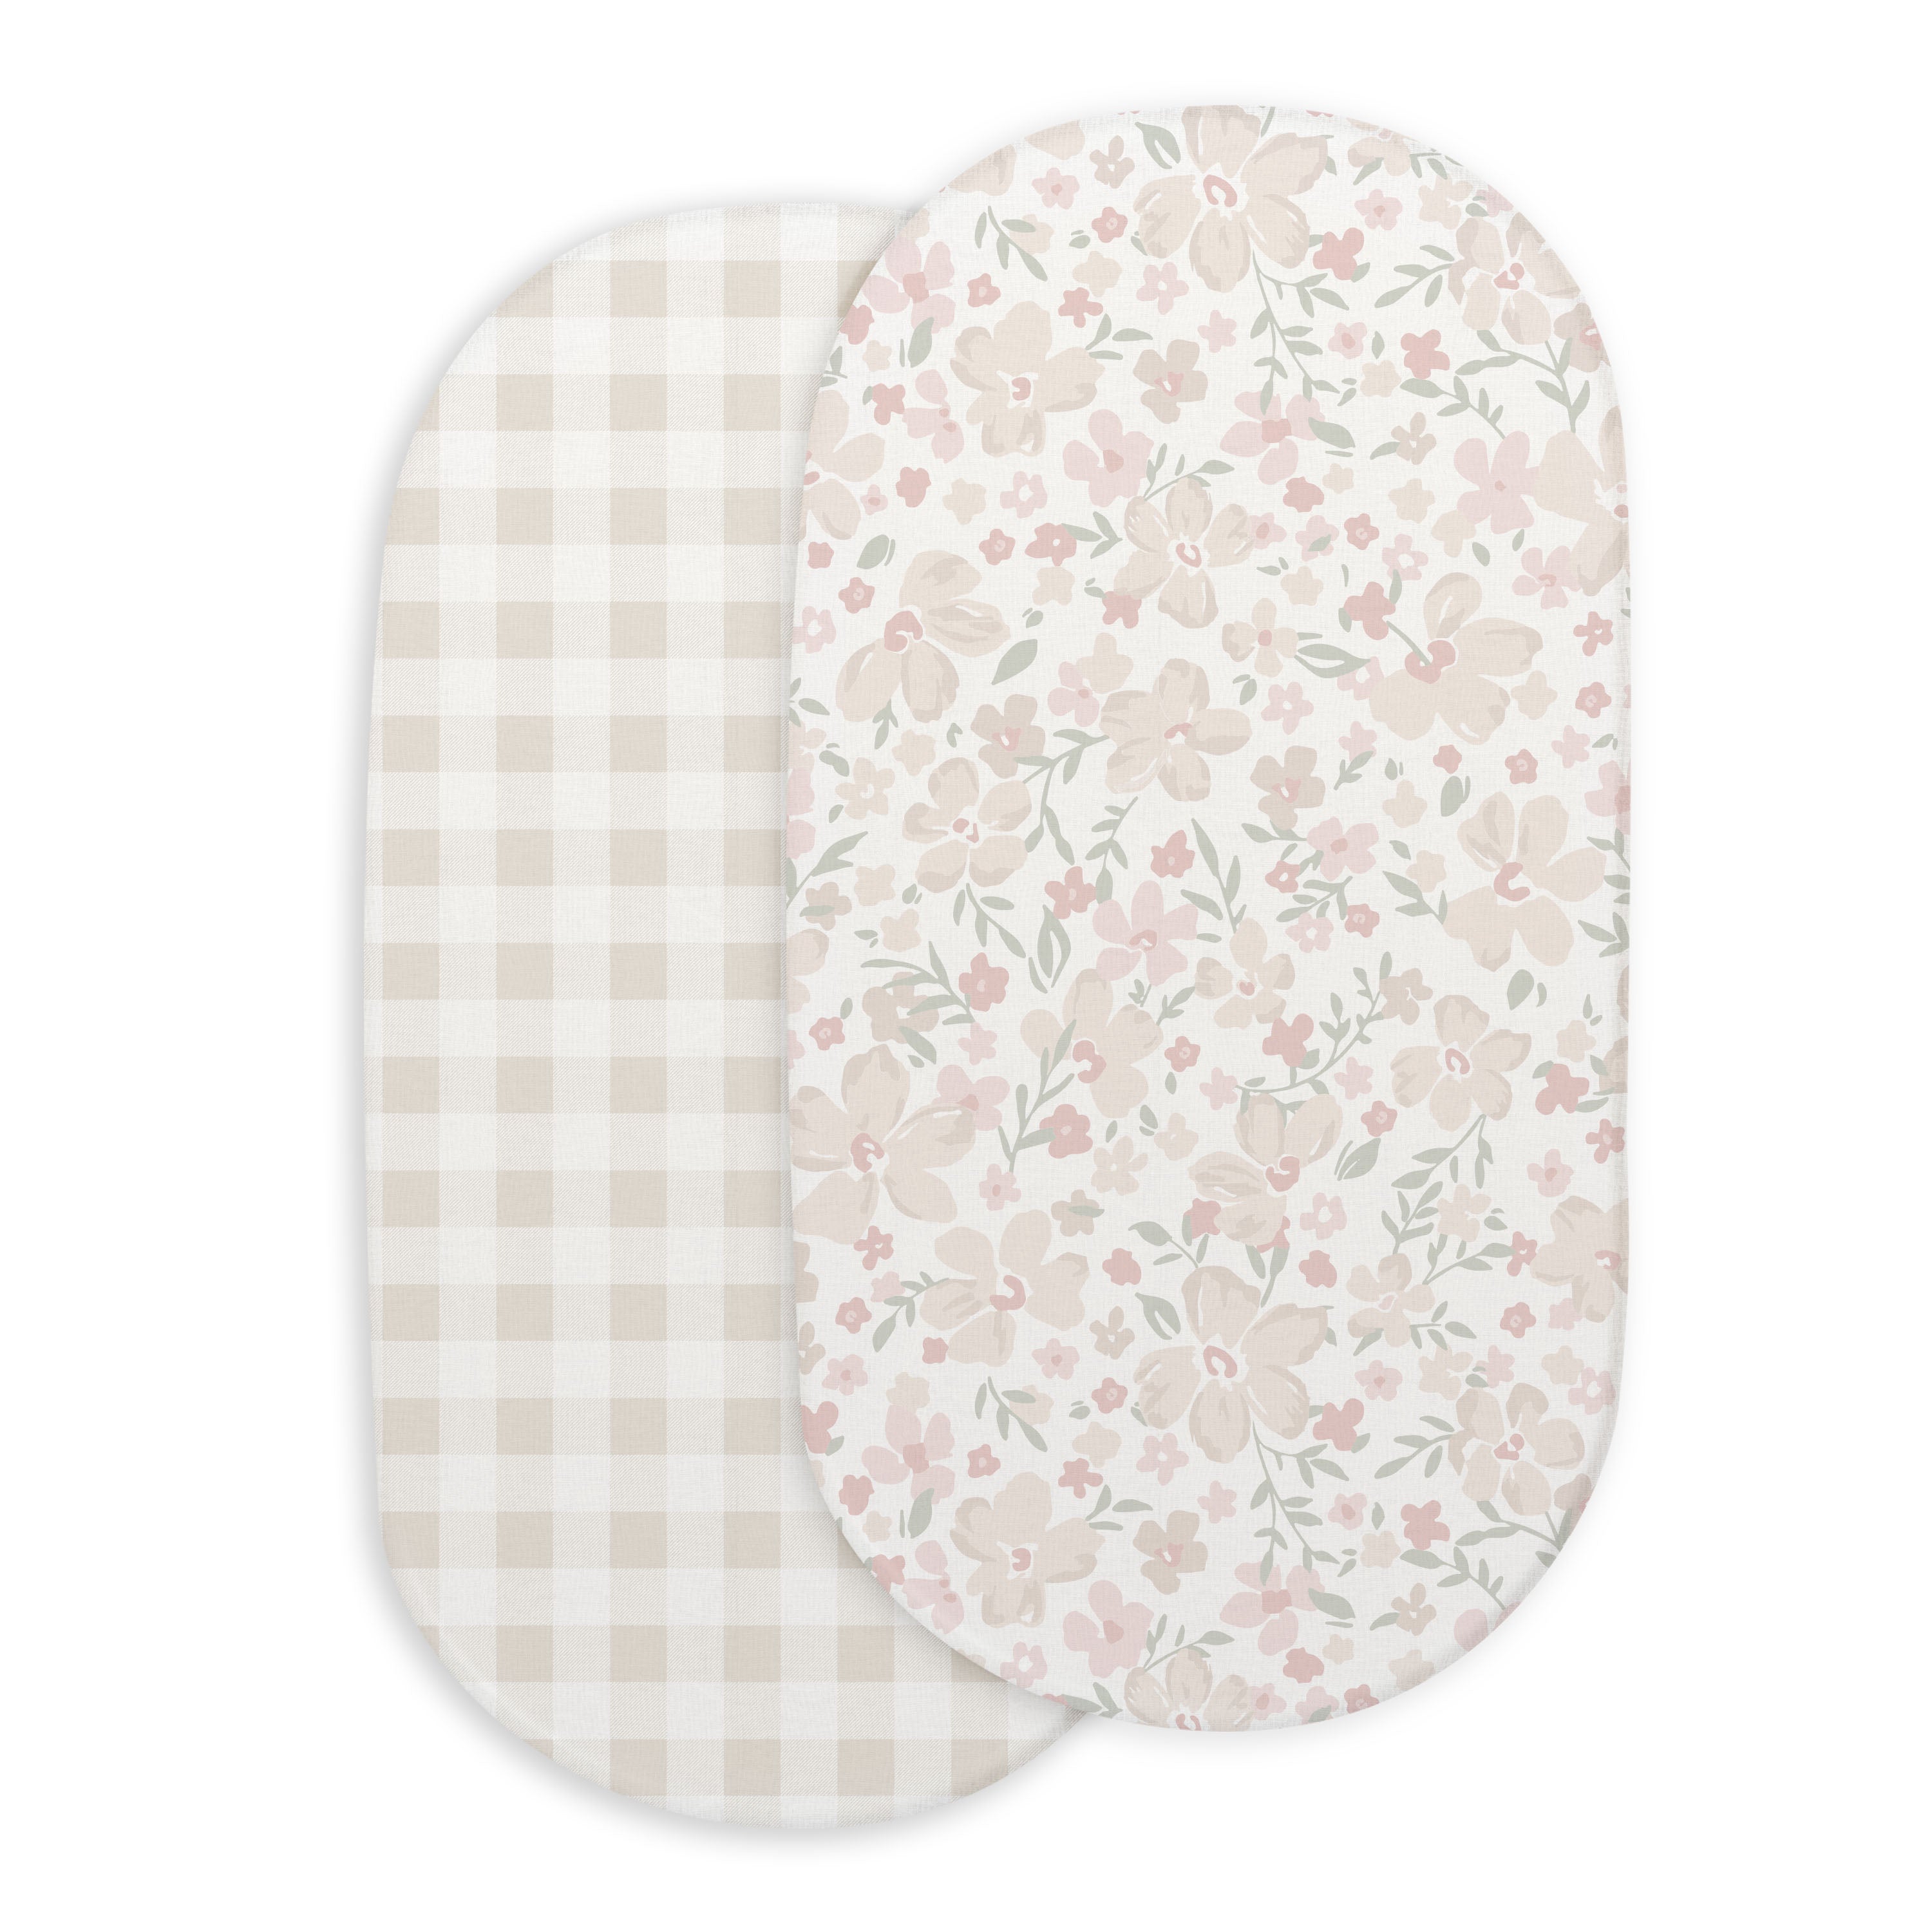 Two oval fabric Bassinet Fitted Sheets from Makemake Organics; one with a beige and white gingham pattern, and the other with a floral pattern featuring pink and green tones.